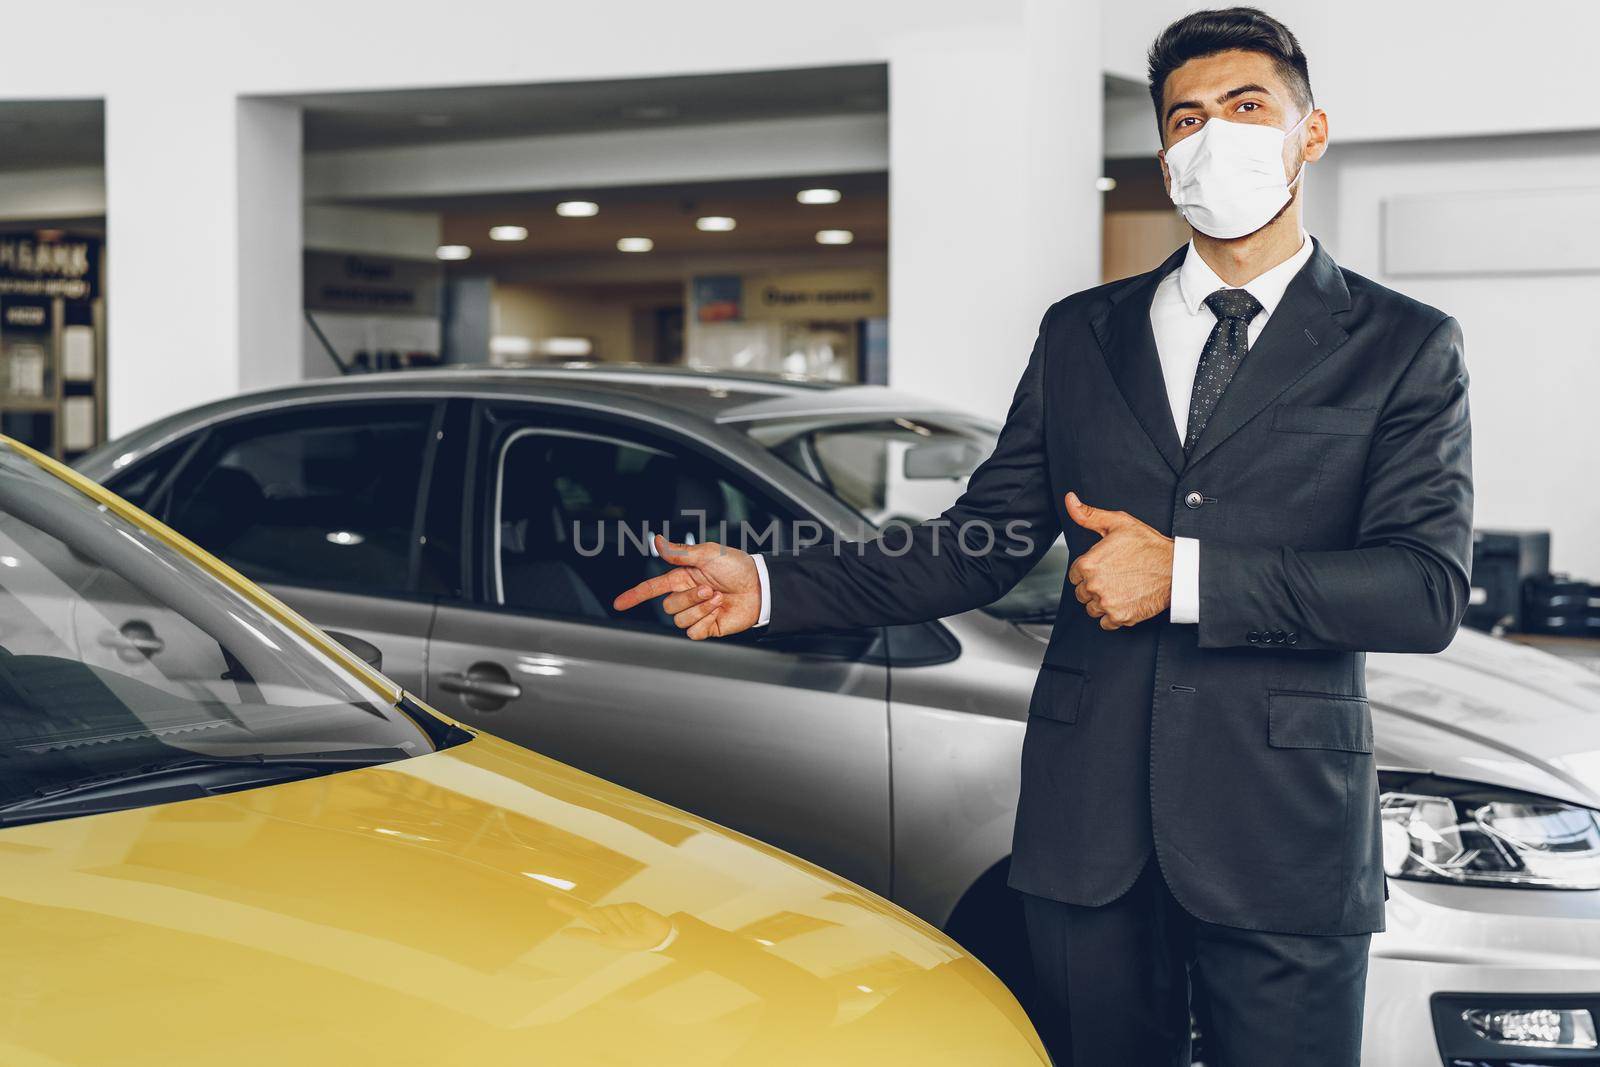 Man car dealer wearing protective medical mask on his working place, coronavirus prevention concept